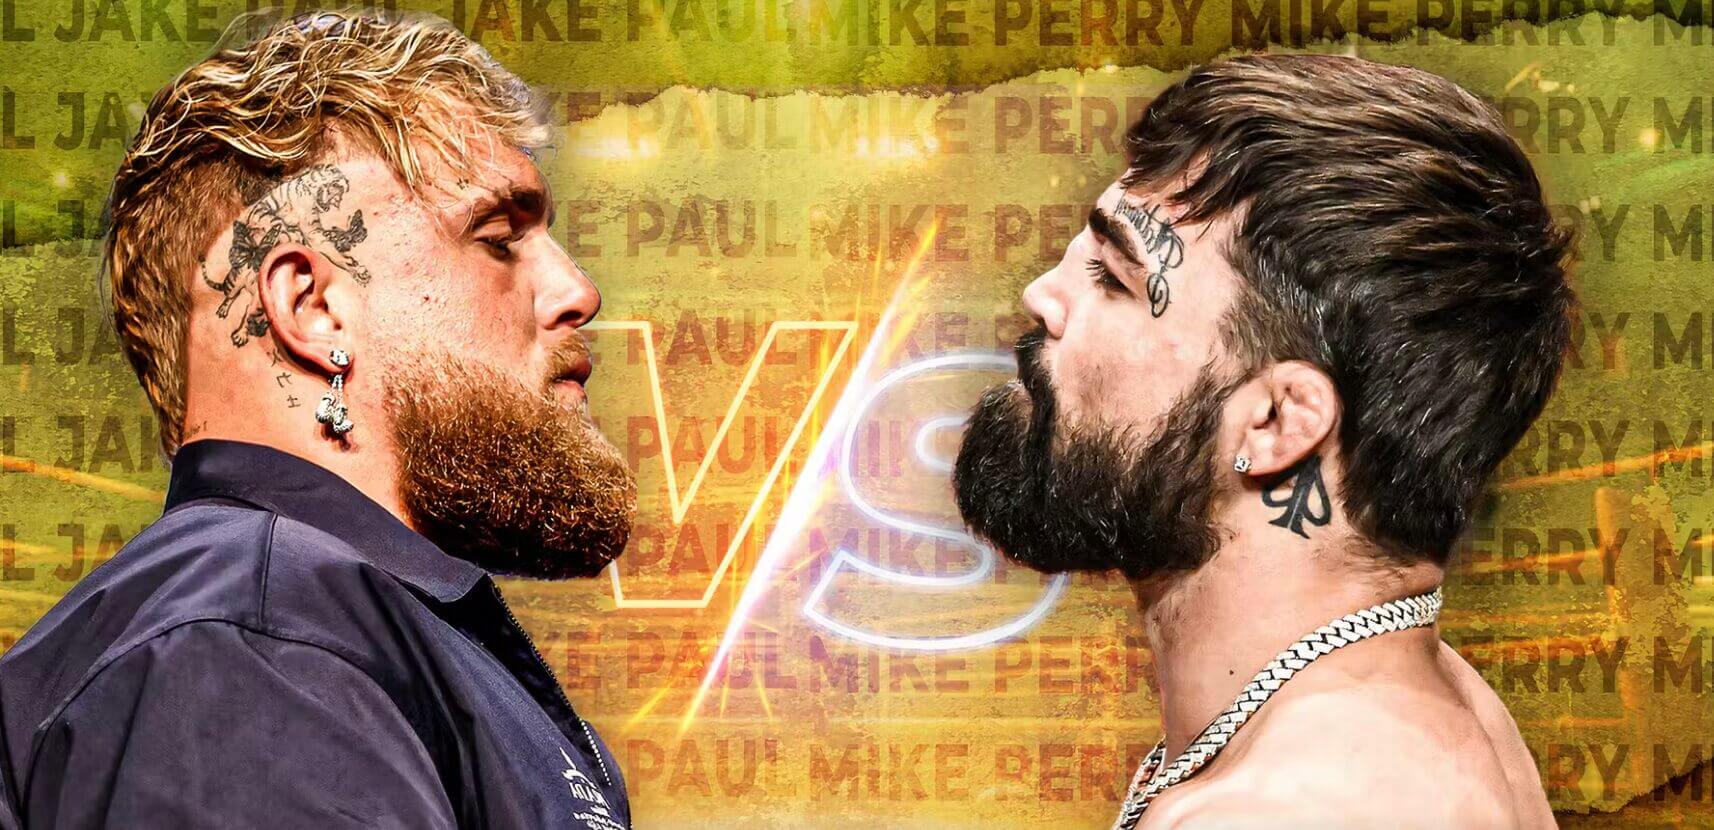 Mike Perry Slams Jake Paul During First Face-Off - 'You’ve Been Fighting Fat Cab Drivers'